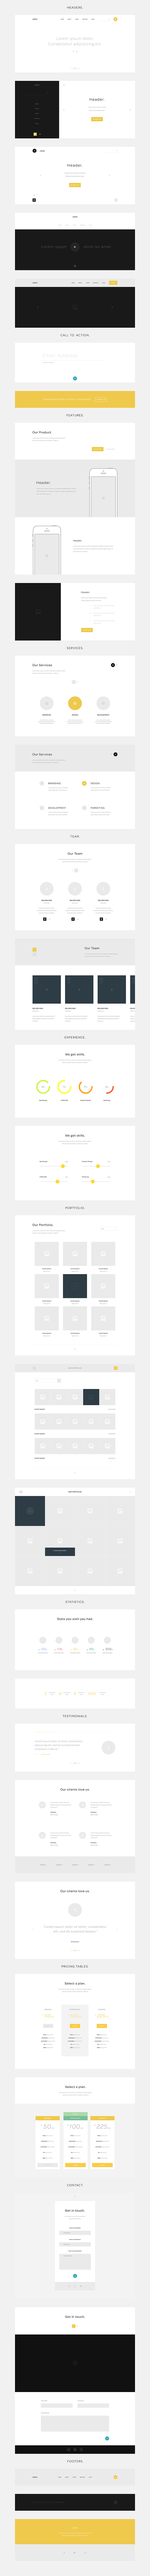 One Page Website Wireframes #2